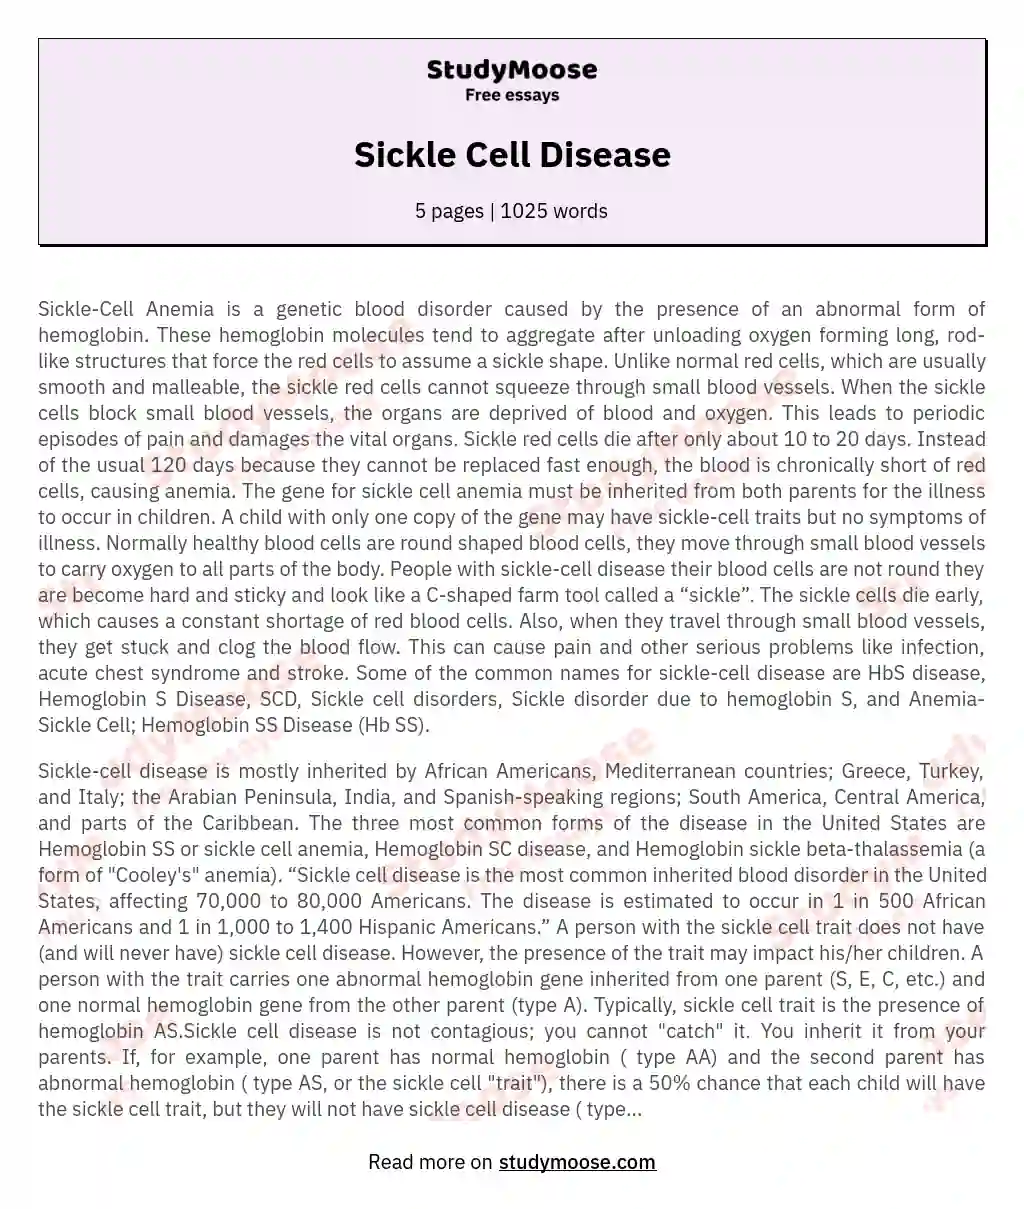 Sickle Cell Disease essay